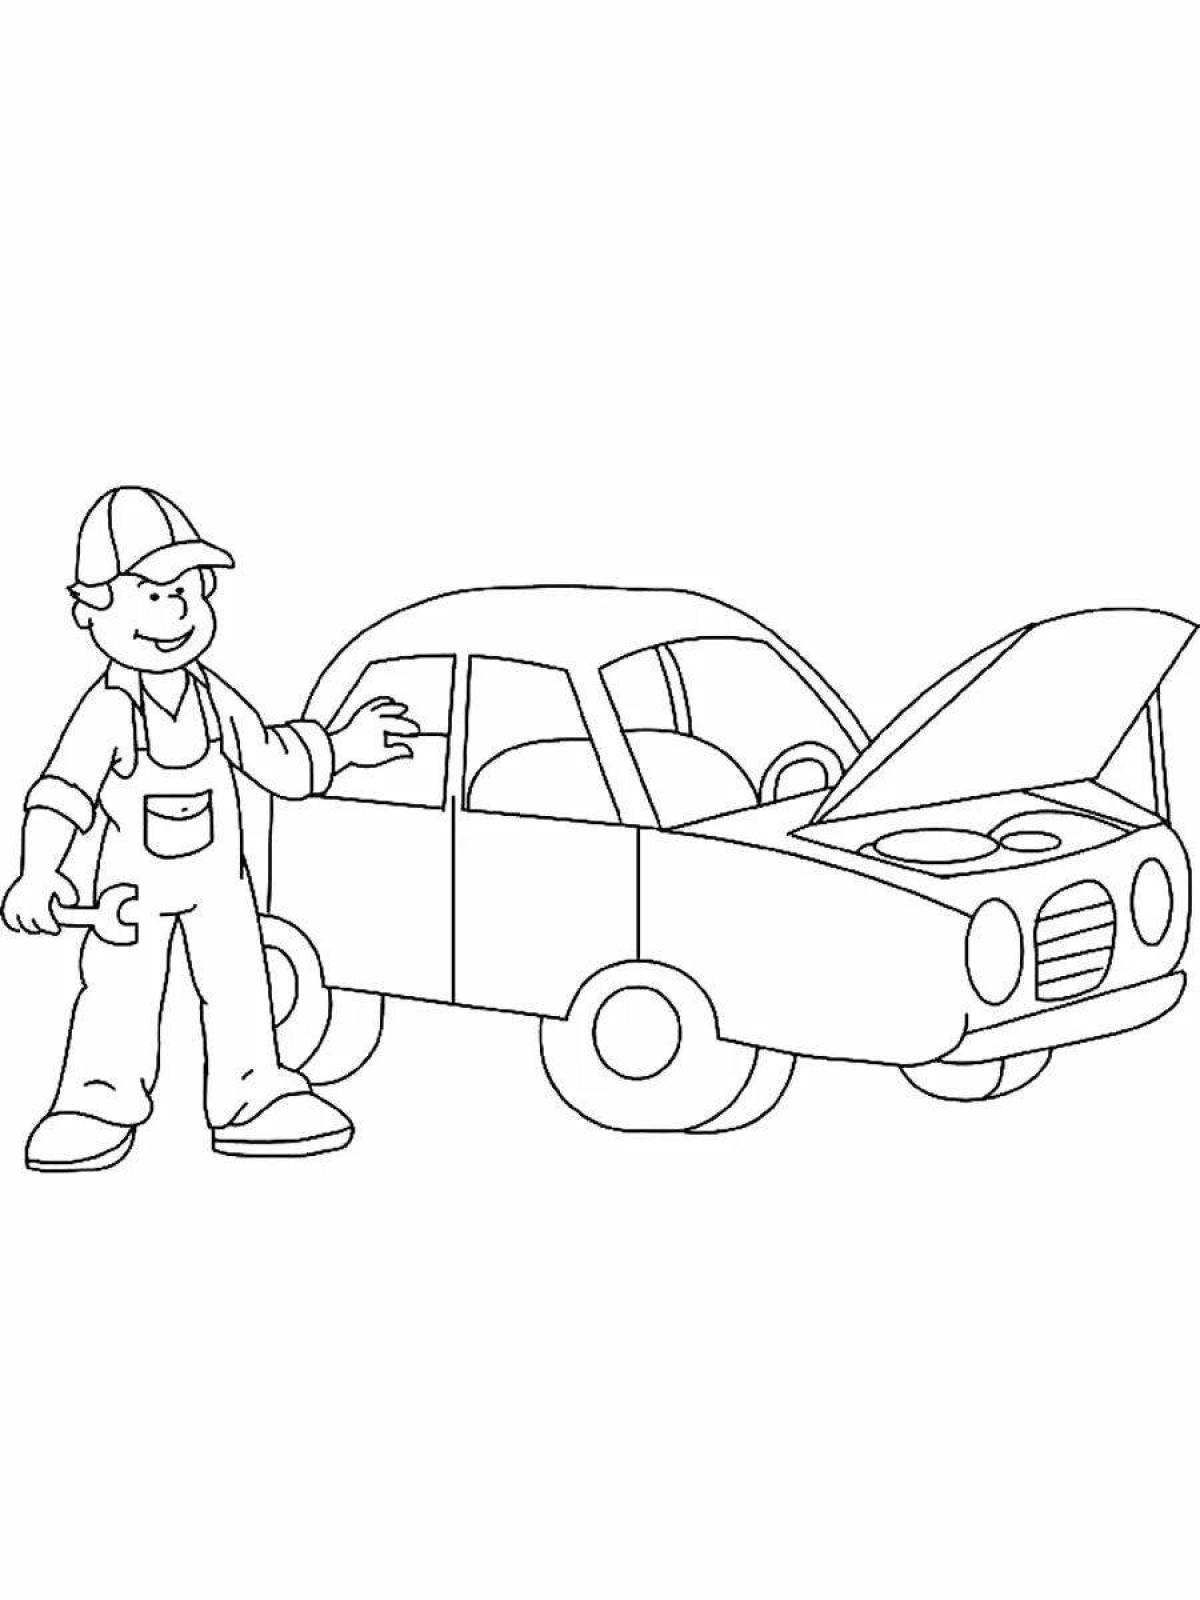 Adorable driver coloring page